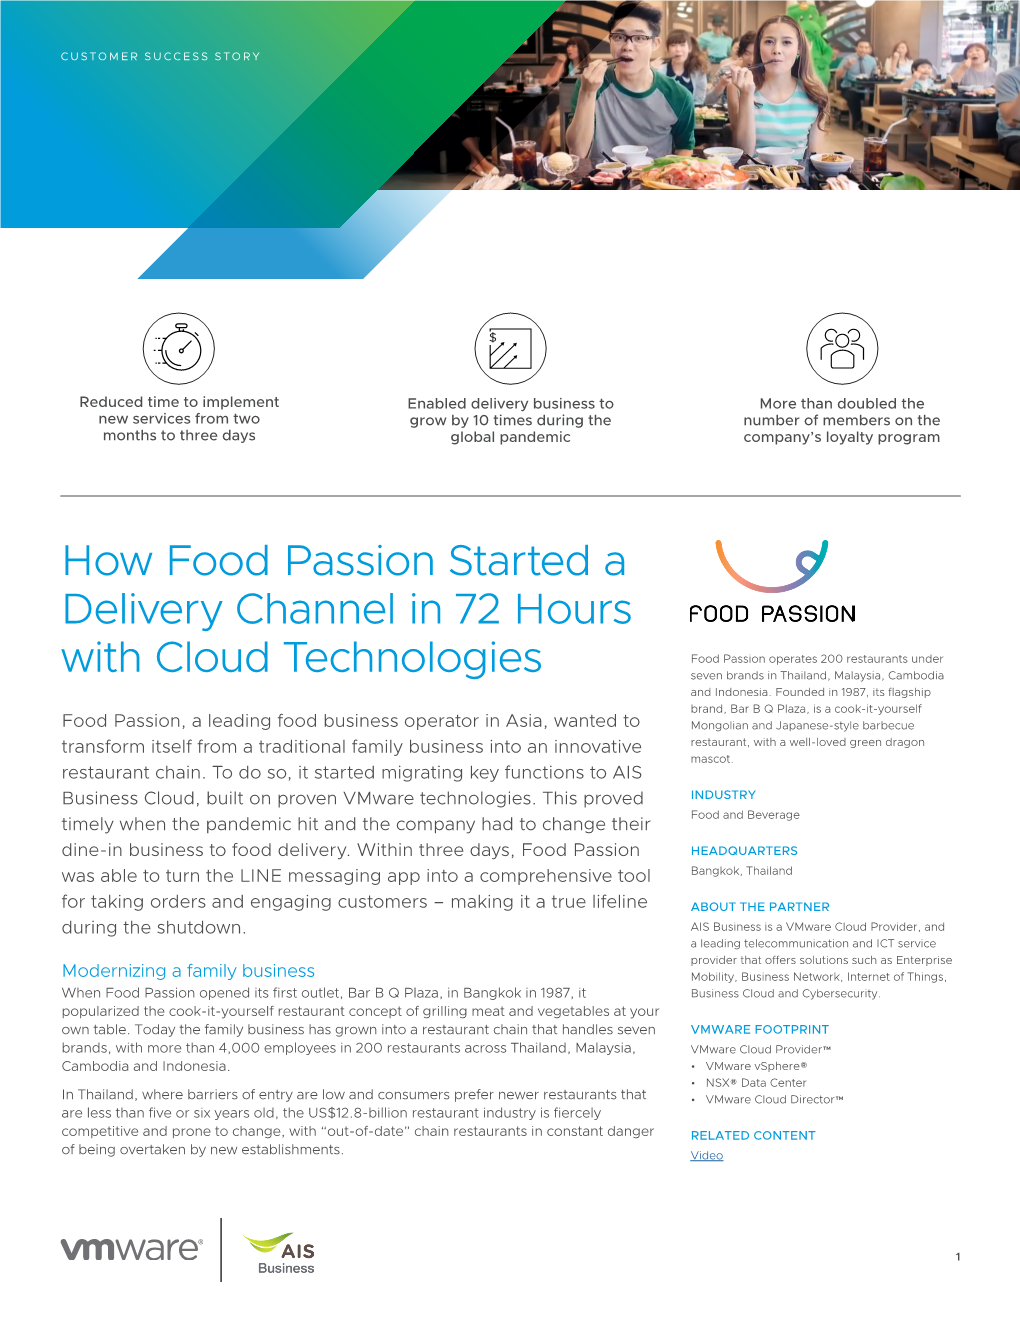 How Food Passion Started a Delivery Channel in 72 Hours with Cloud Technologies